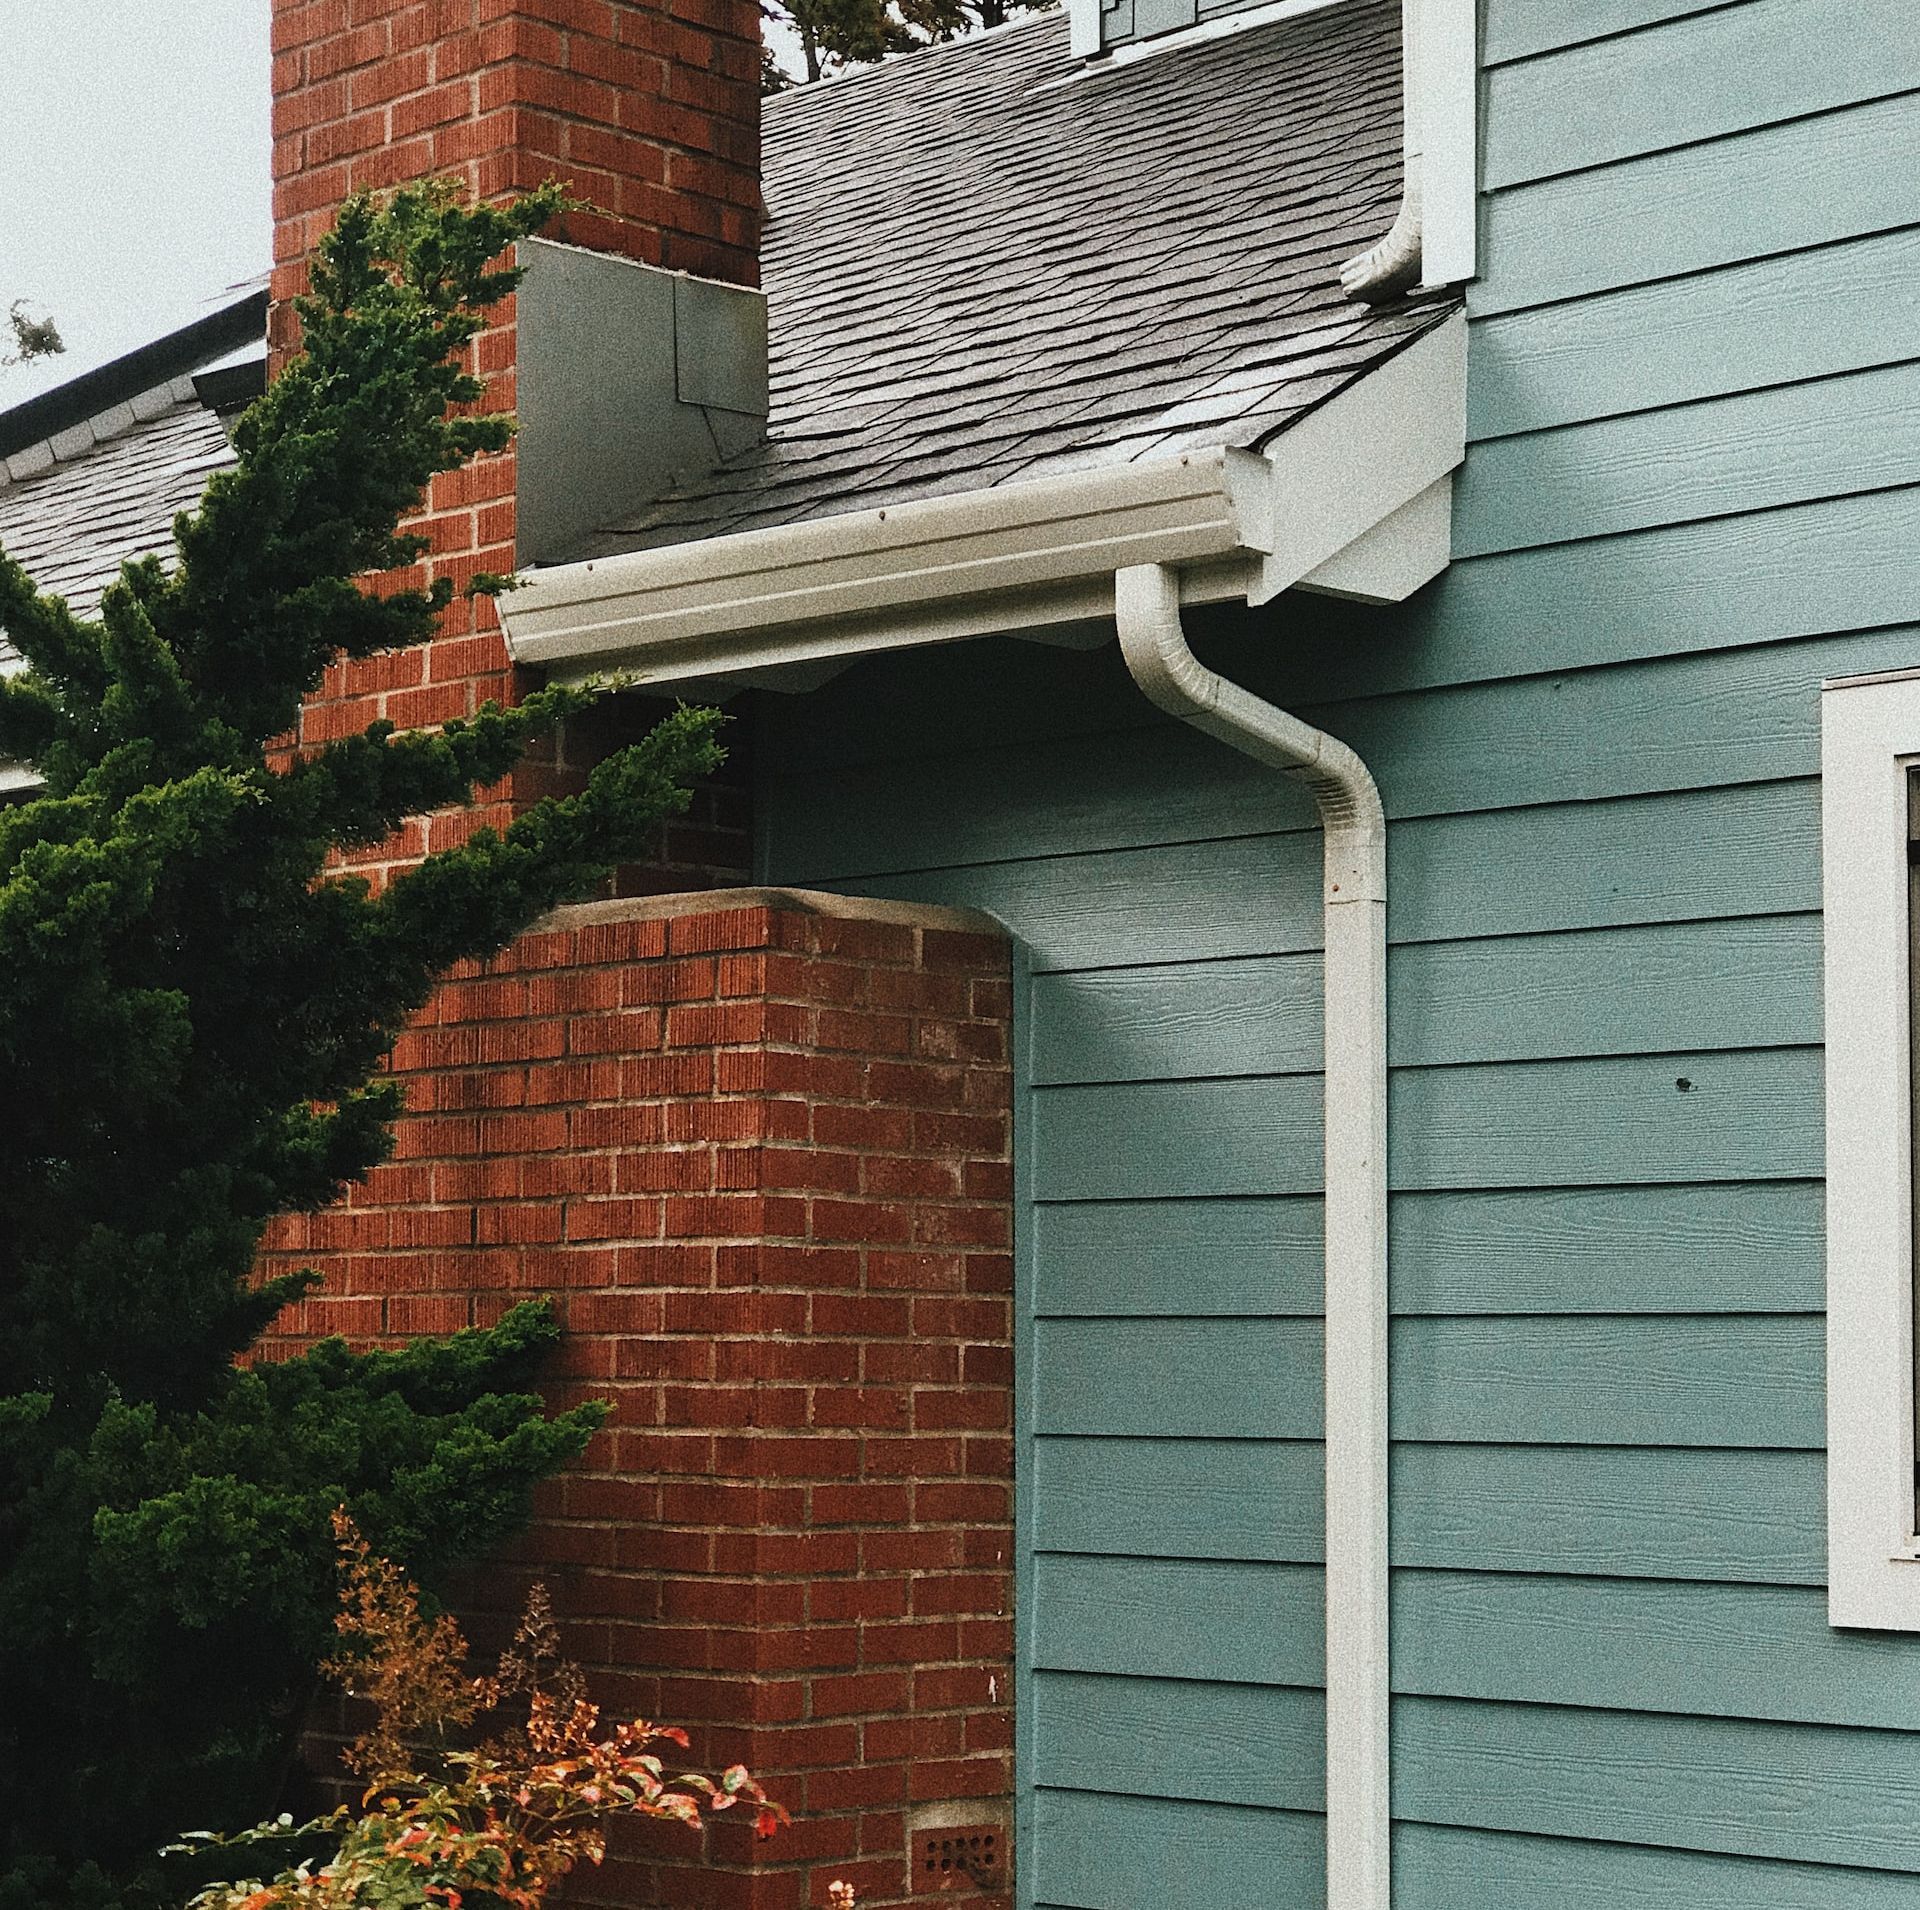 roof gutters that need cleaning